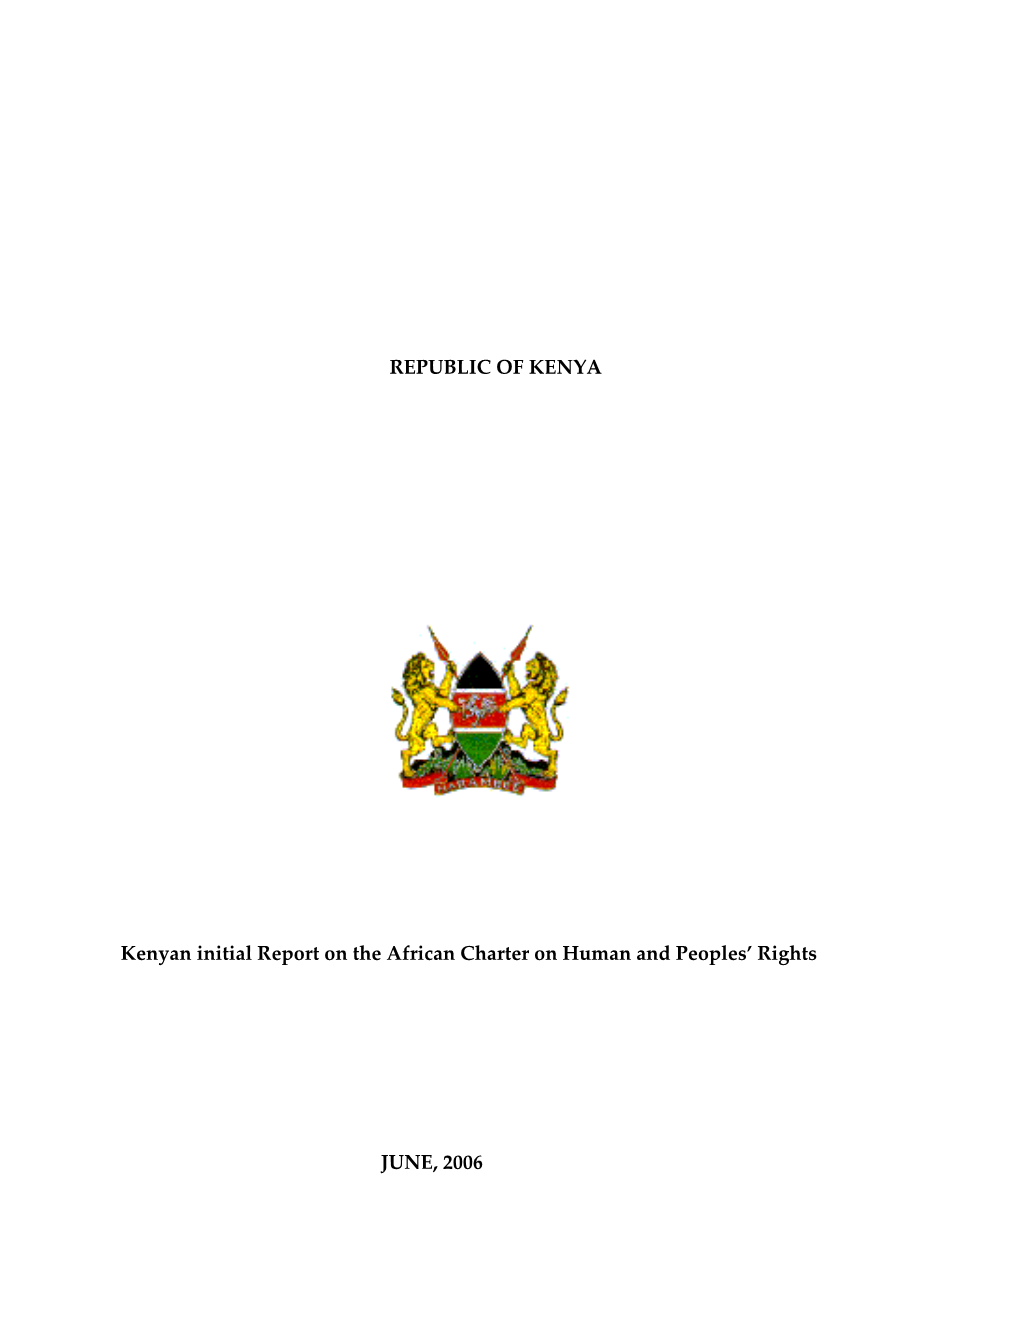 Kenyan Initial Report on the African Charter on Human and Peoples Rights